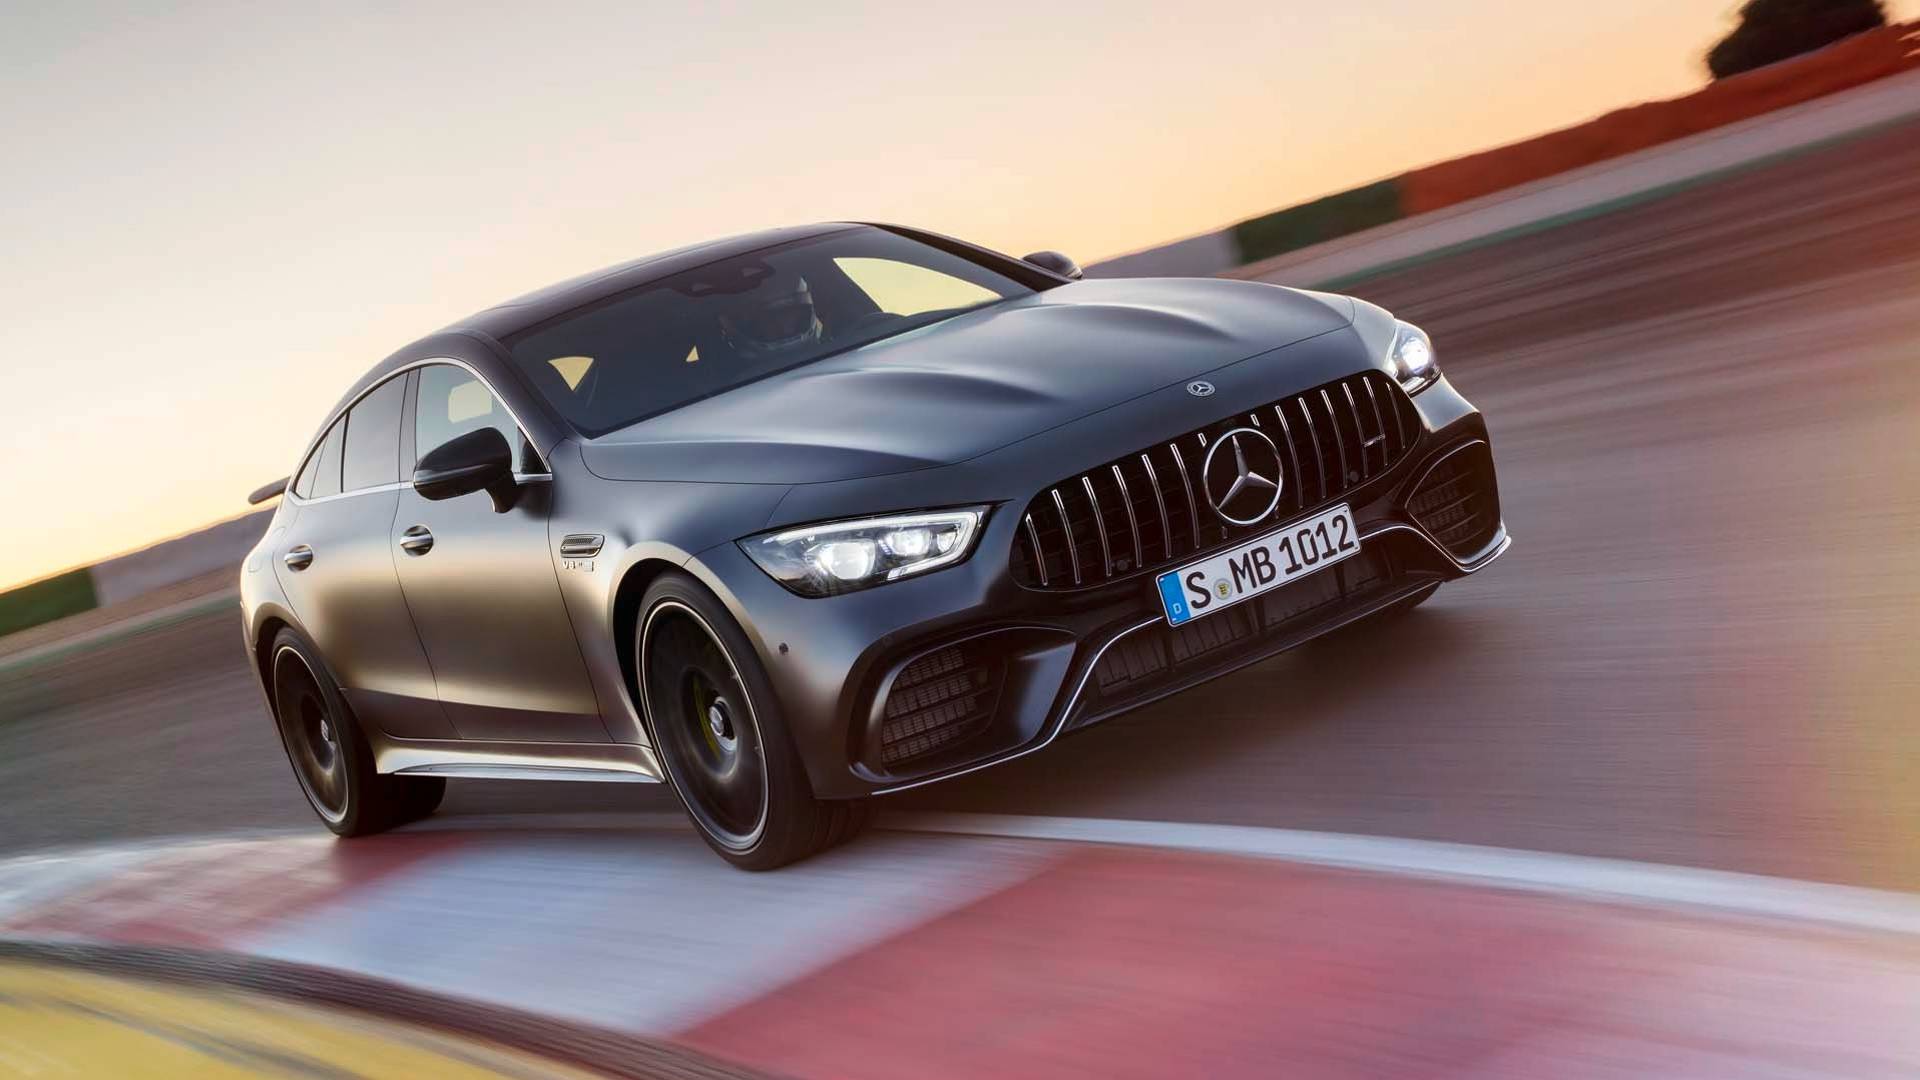 7 30 Something Nurburgring Lap For Mercedes AMG GT 4 Door Coupe